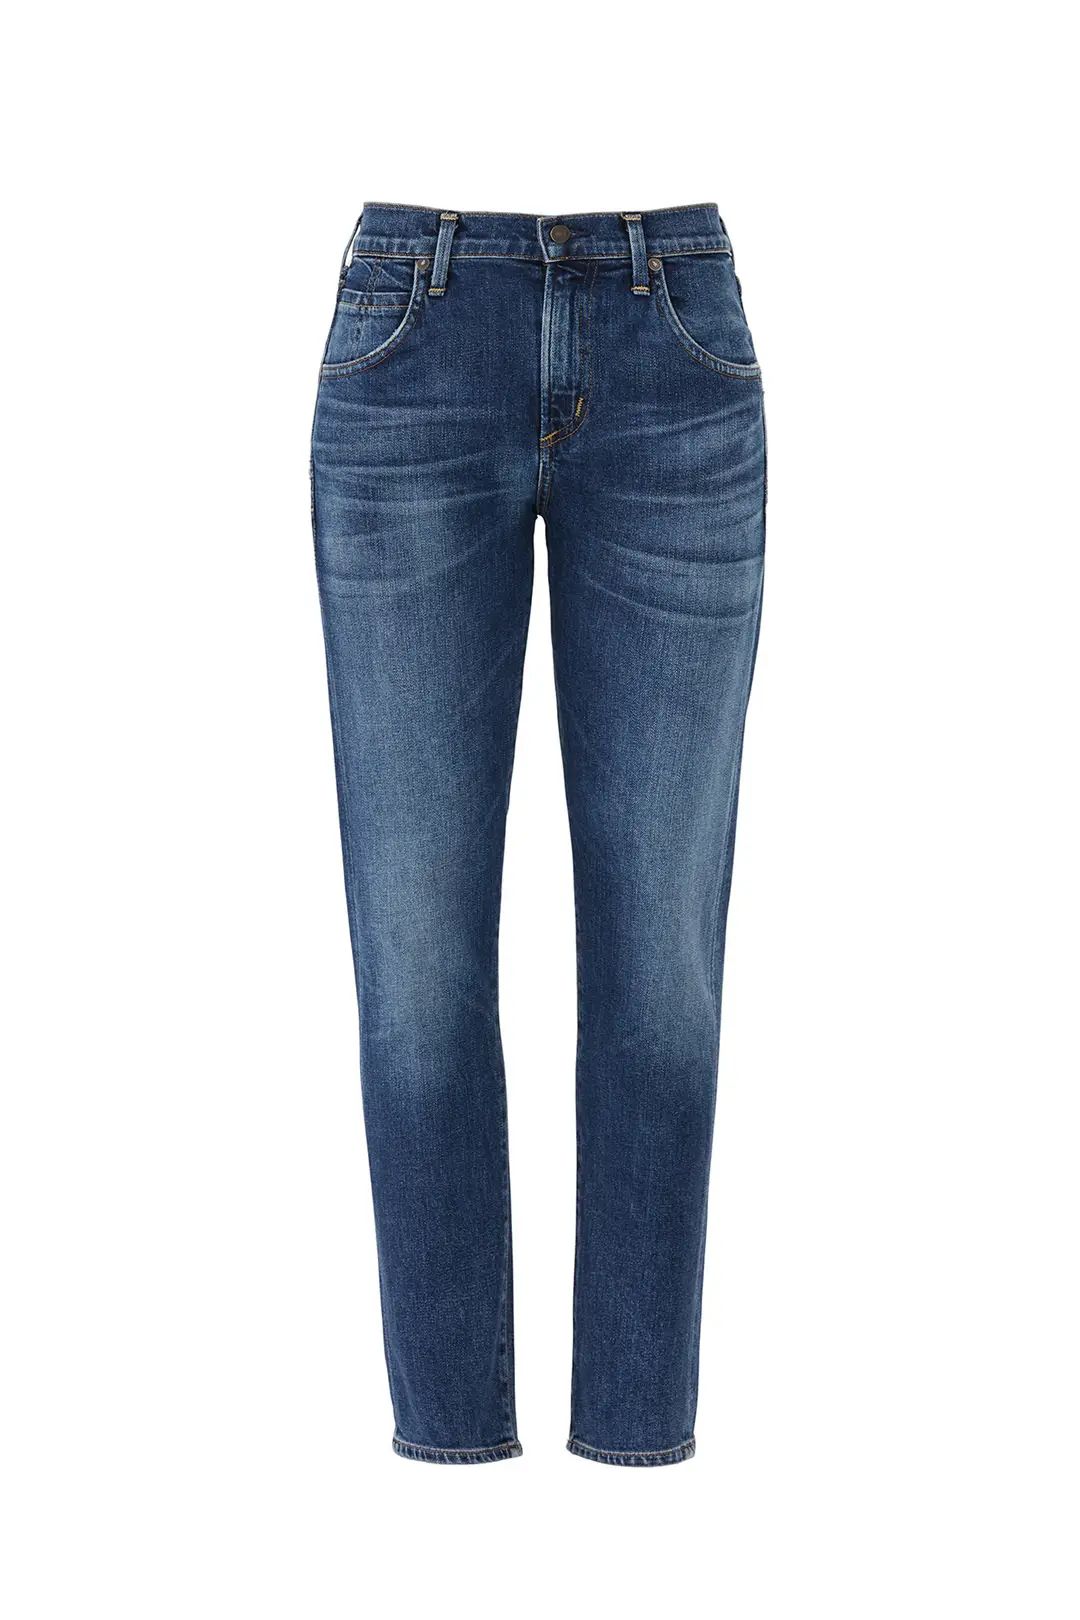 Citizens Of Humanity New Moon Elsa Jeans | Rent The Runway